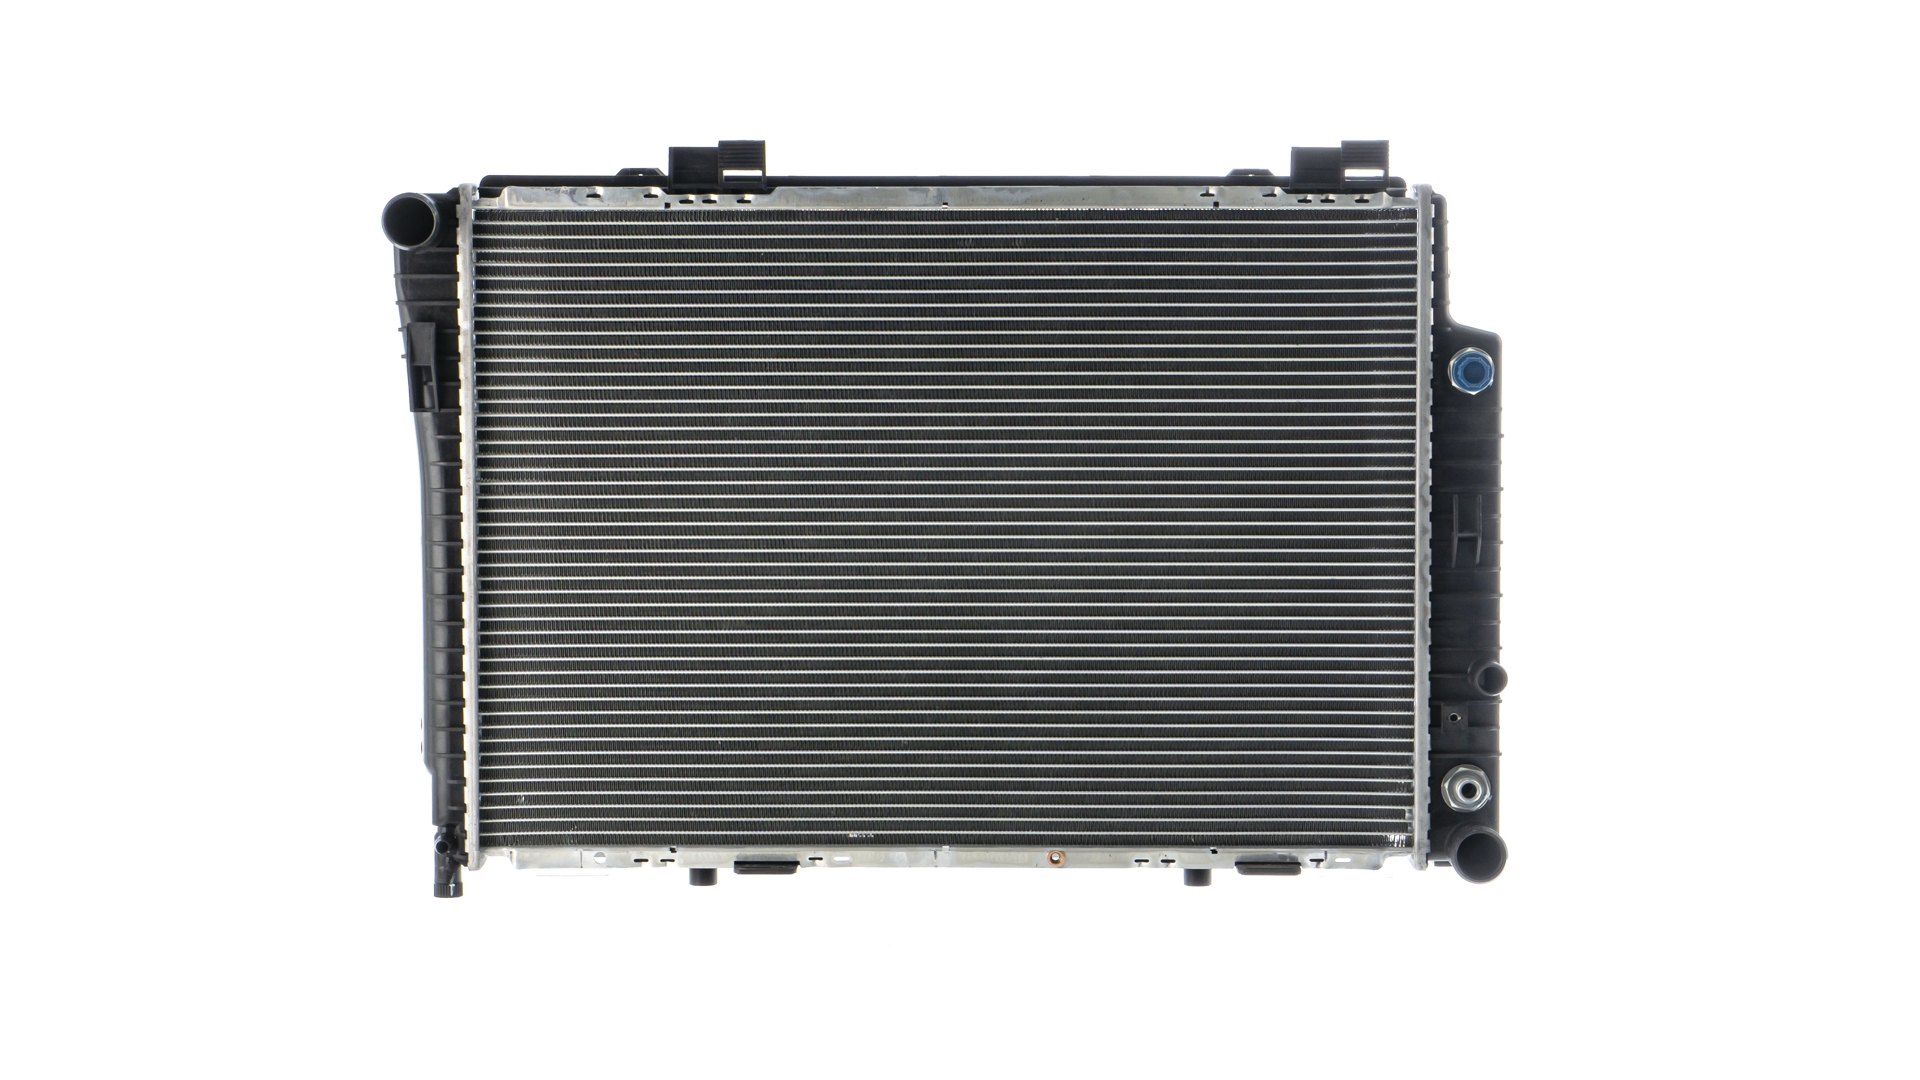 MAHLE ORIGINAL CR 248 000S Engine radiator for vehicles with air conditioning, 615 x 422 x 42 mm, Manual-/optional automatic transmission, Brazed cooling fins